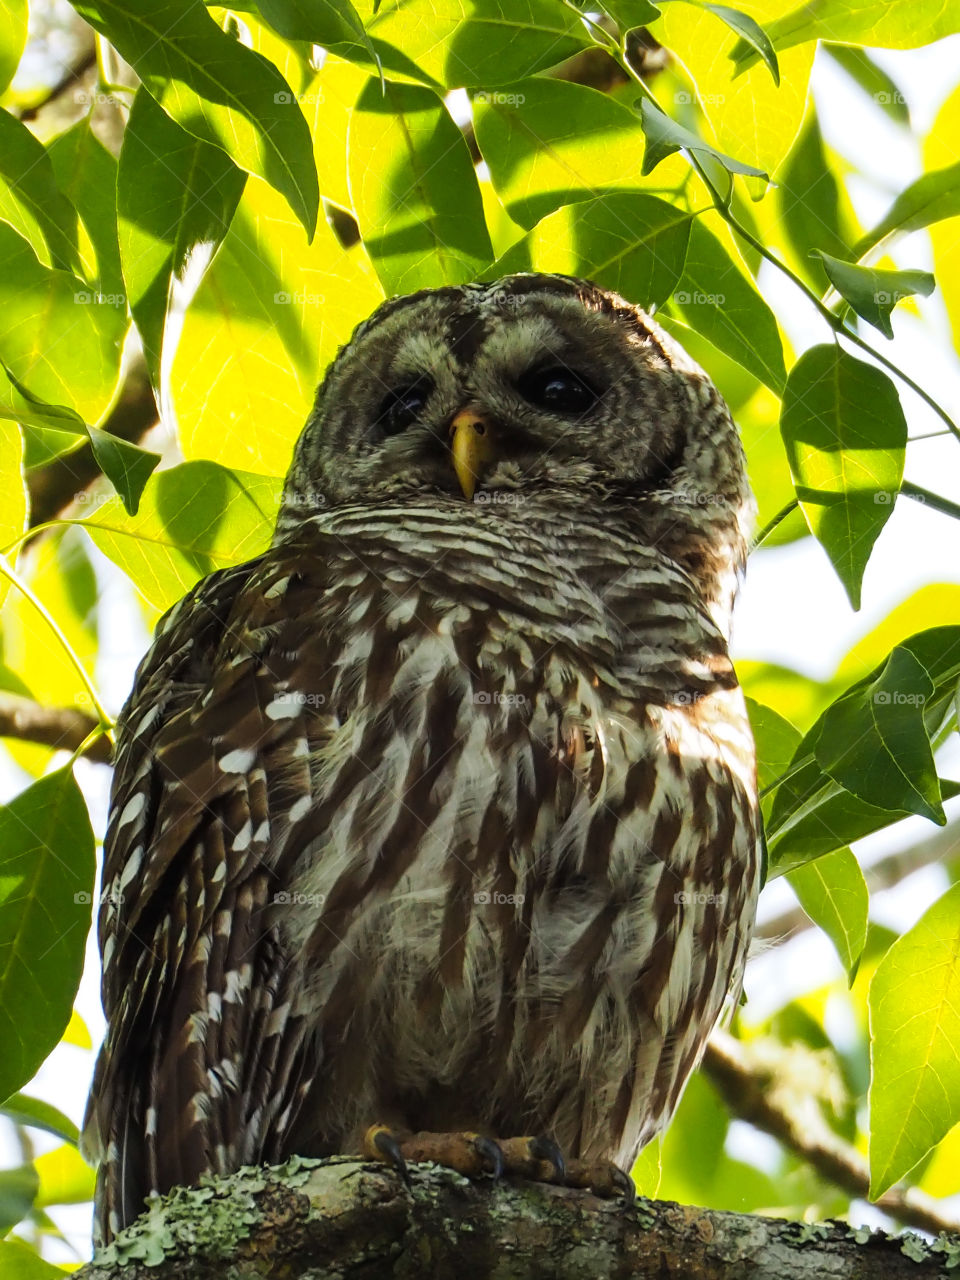 Barred Owl on a branch